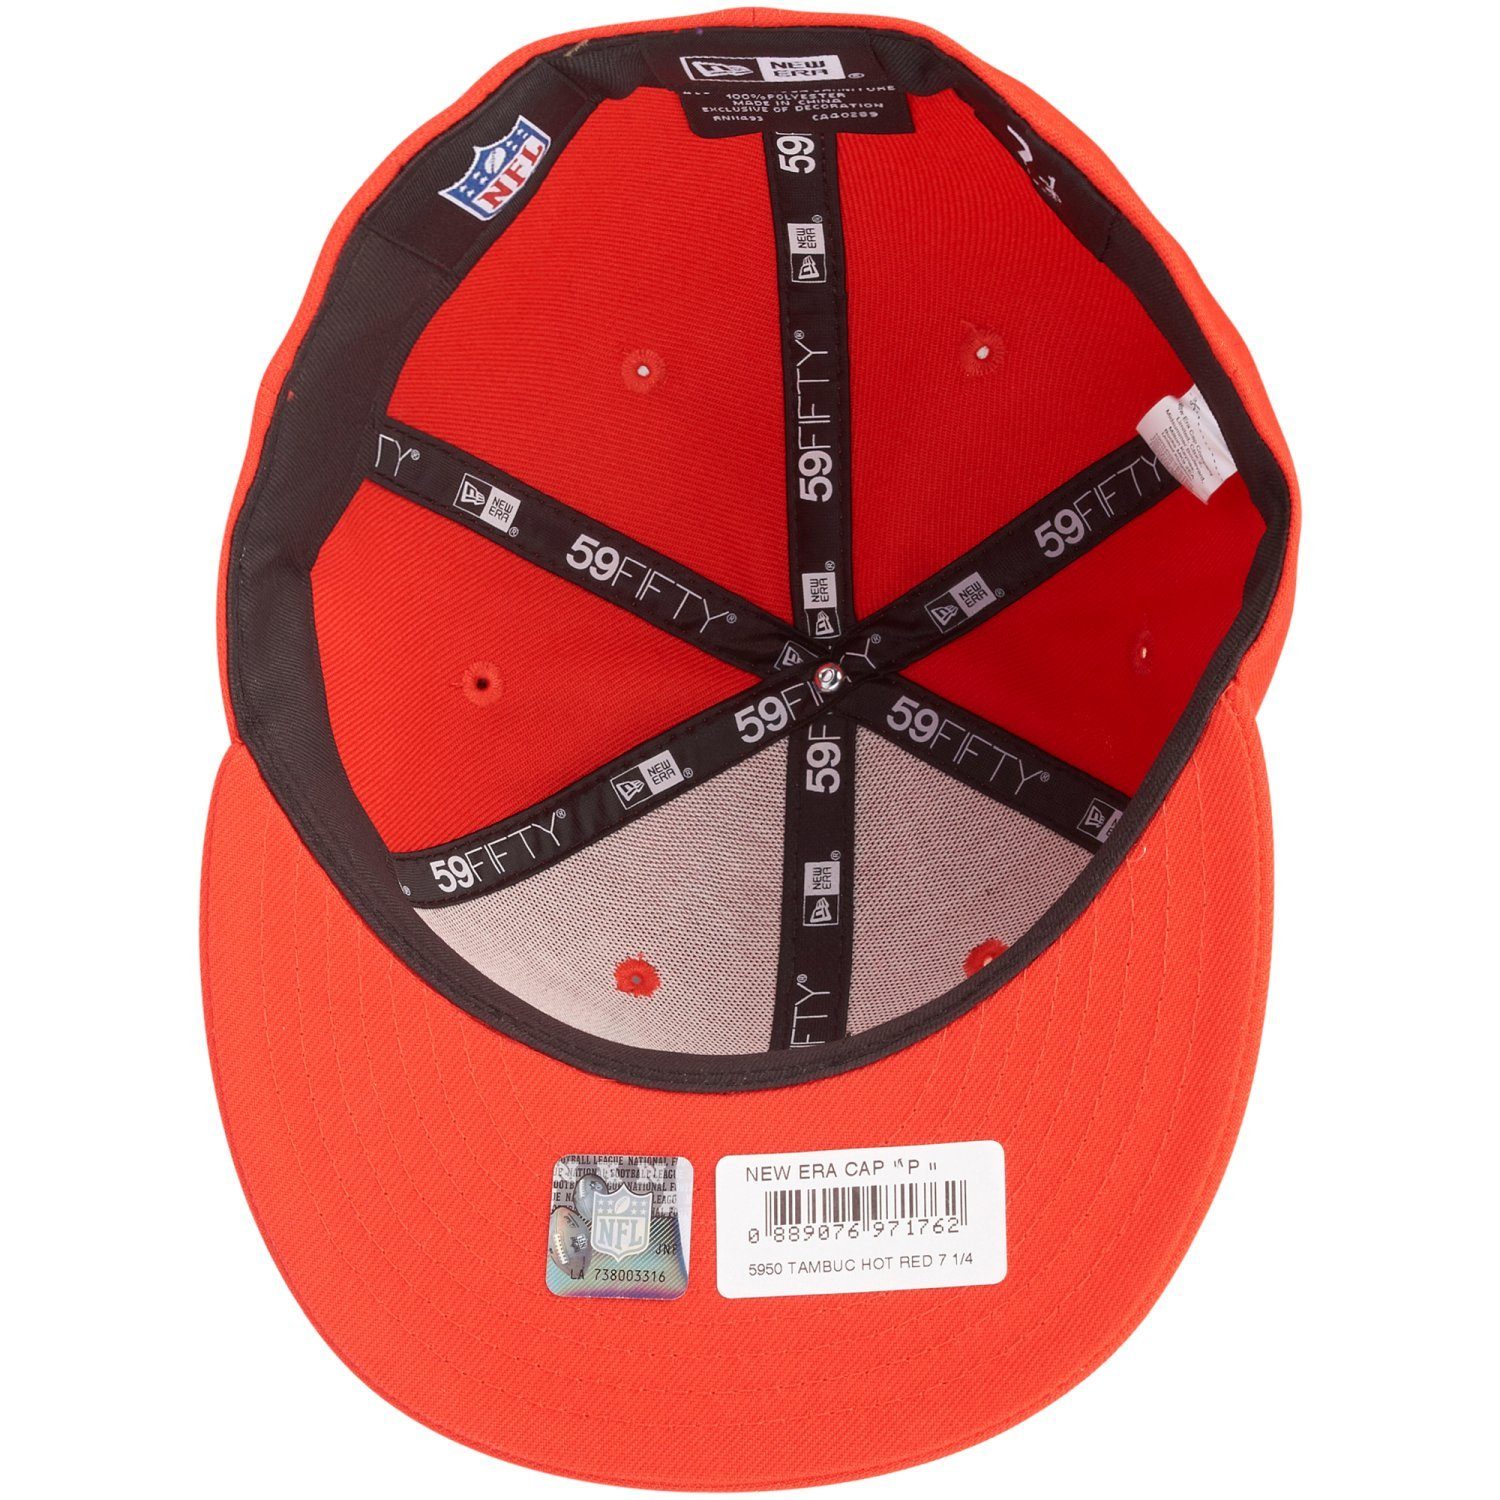 Rot NFL Era Buccaneers Bay Cap Fitted Tampa New 59Fifty